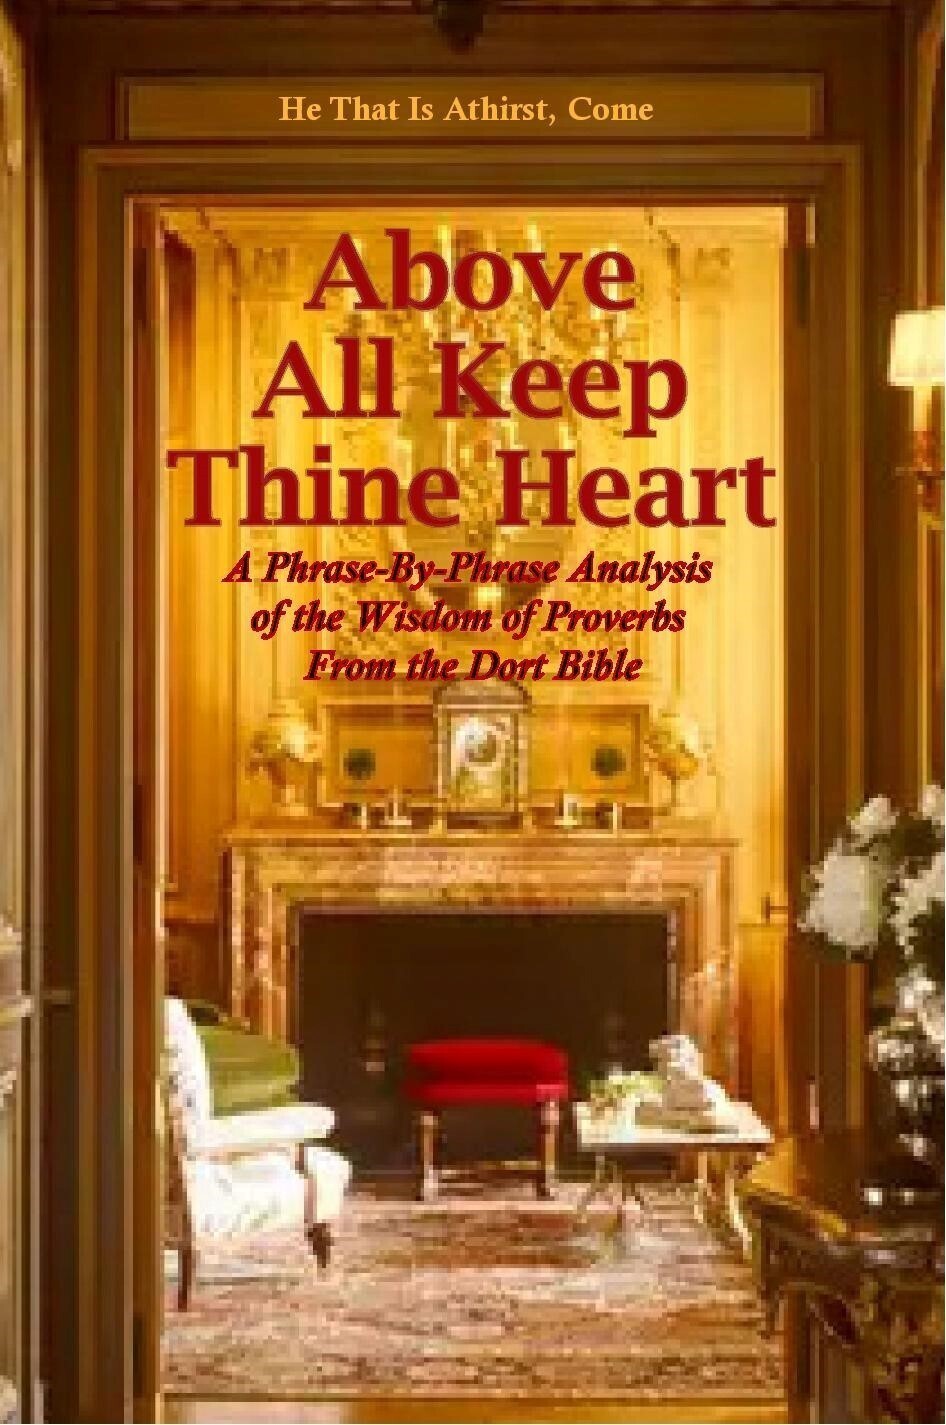 Above All Keep Thine Heart: A Phrase-By-Phrase Analysis of the Wisdom of Proverbs From the Dort Bible